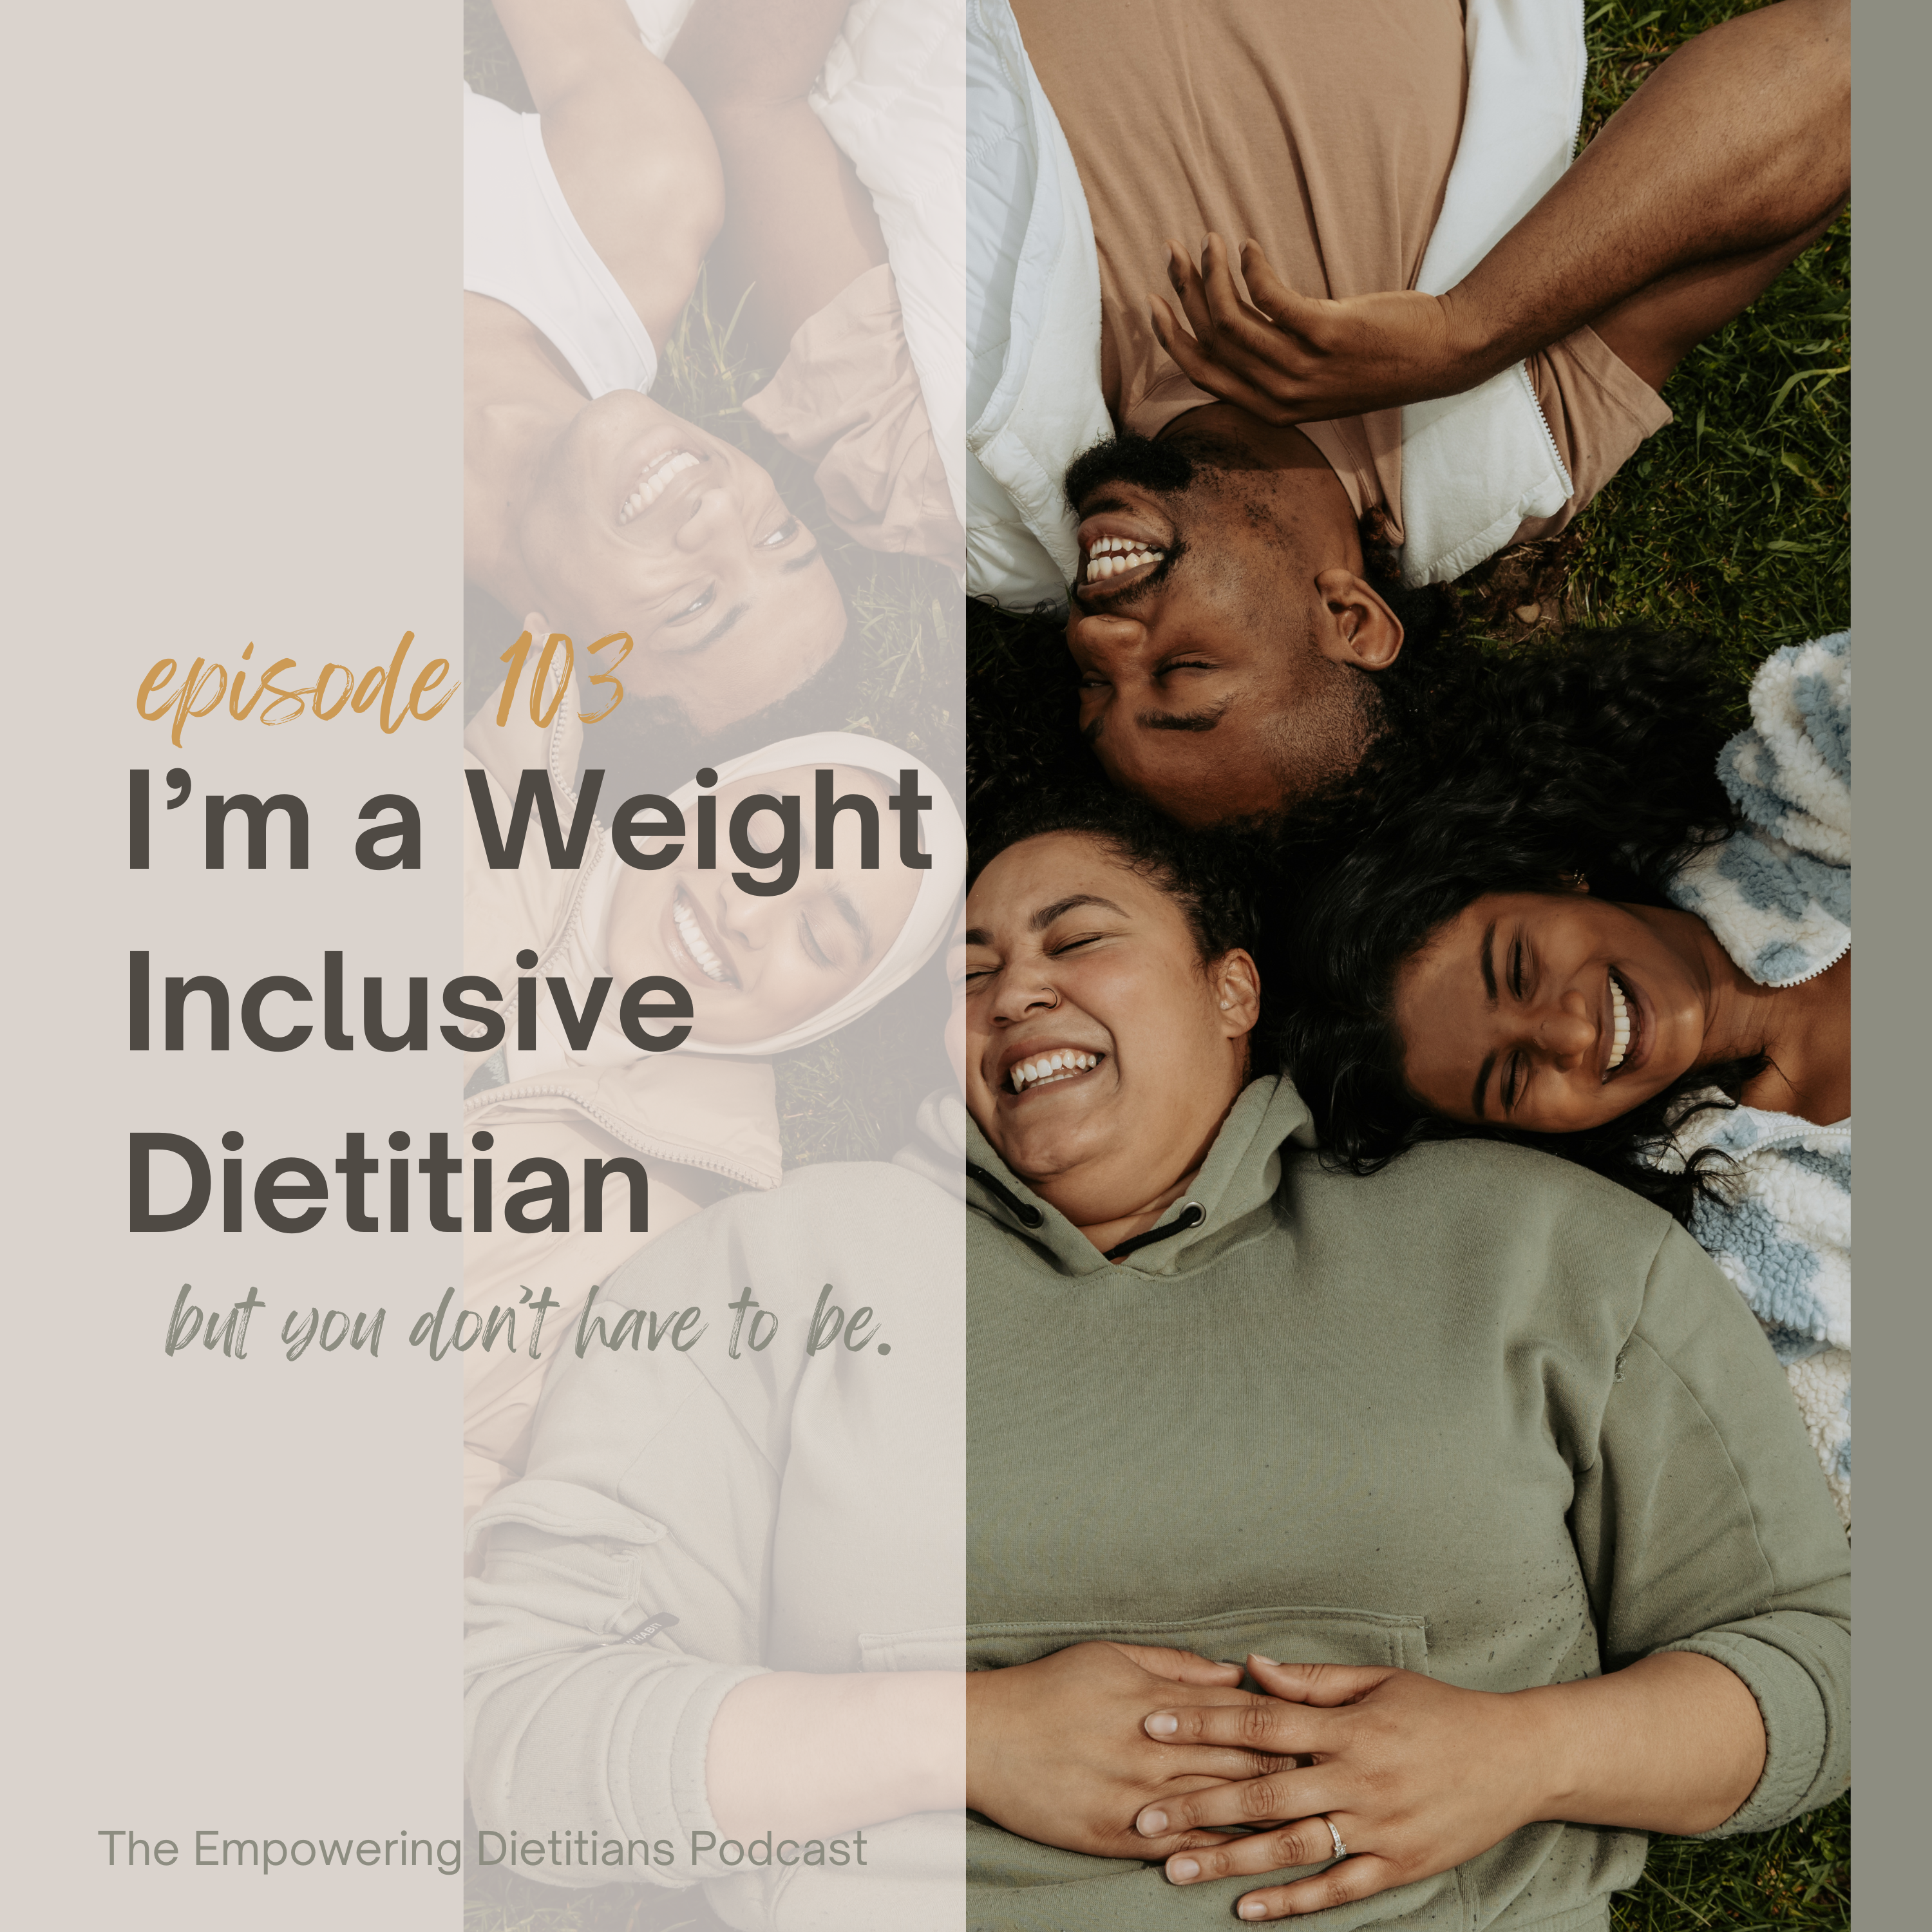 i'm a weight inclusive dietitian - but you don't have to be